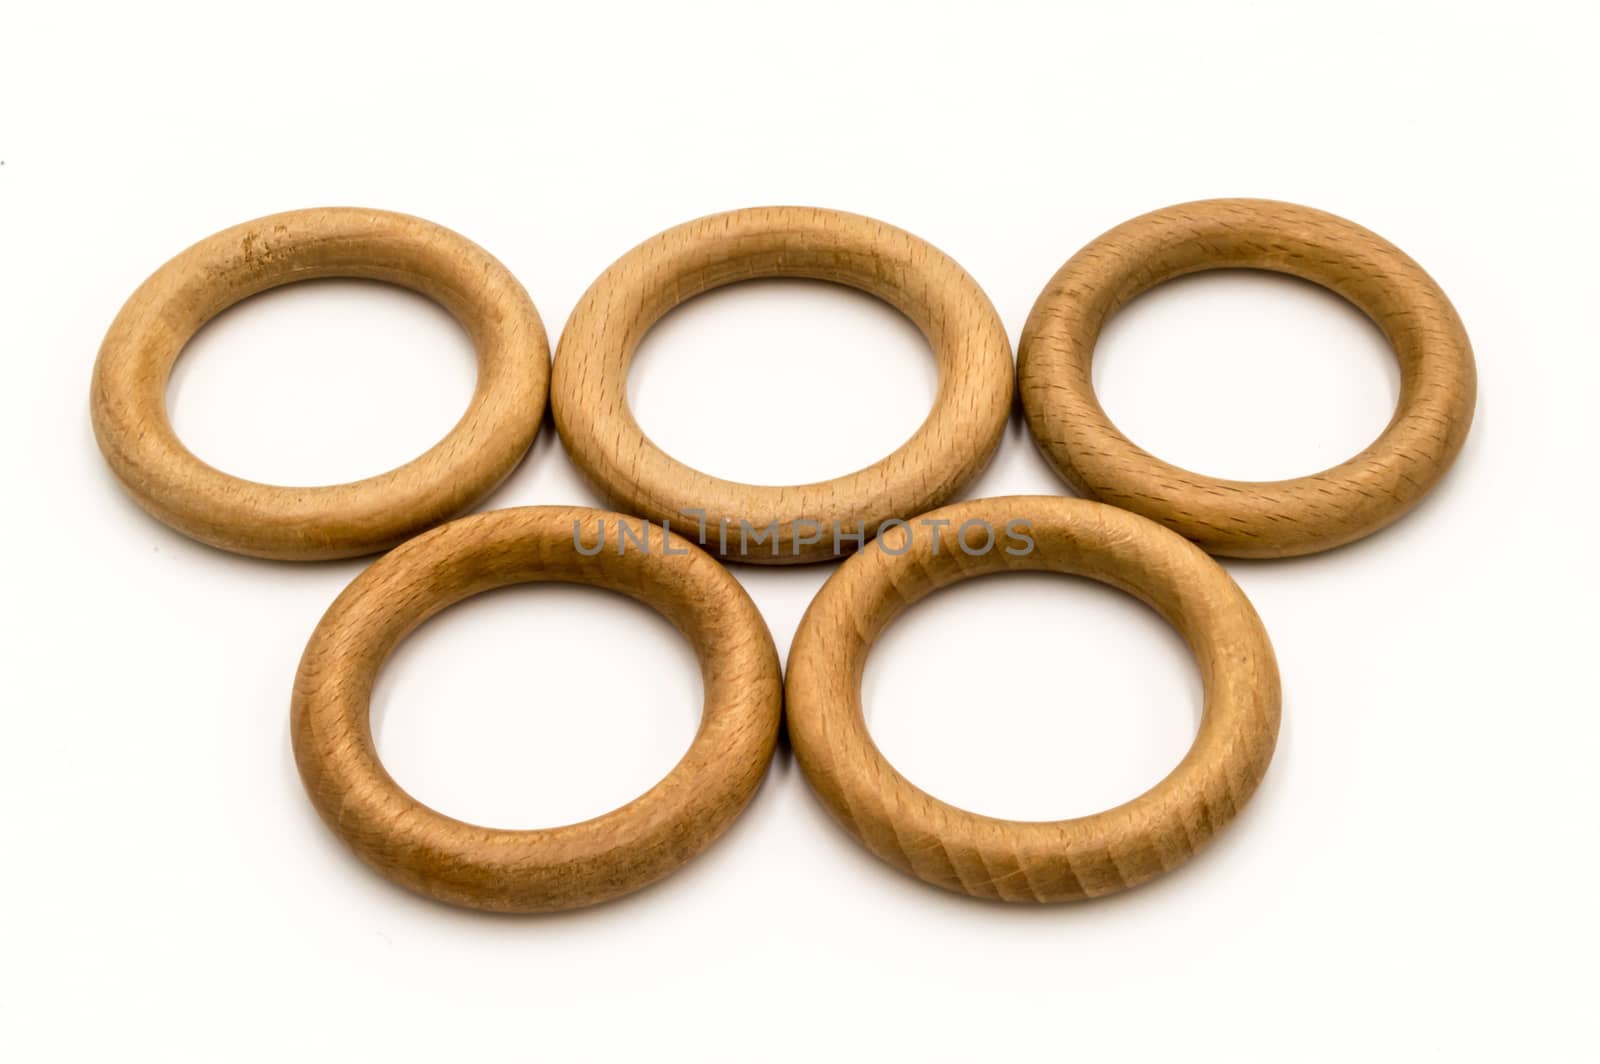 olympic ring in wooden circle  by Philou1000